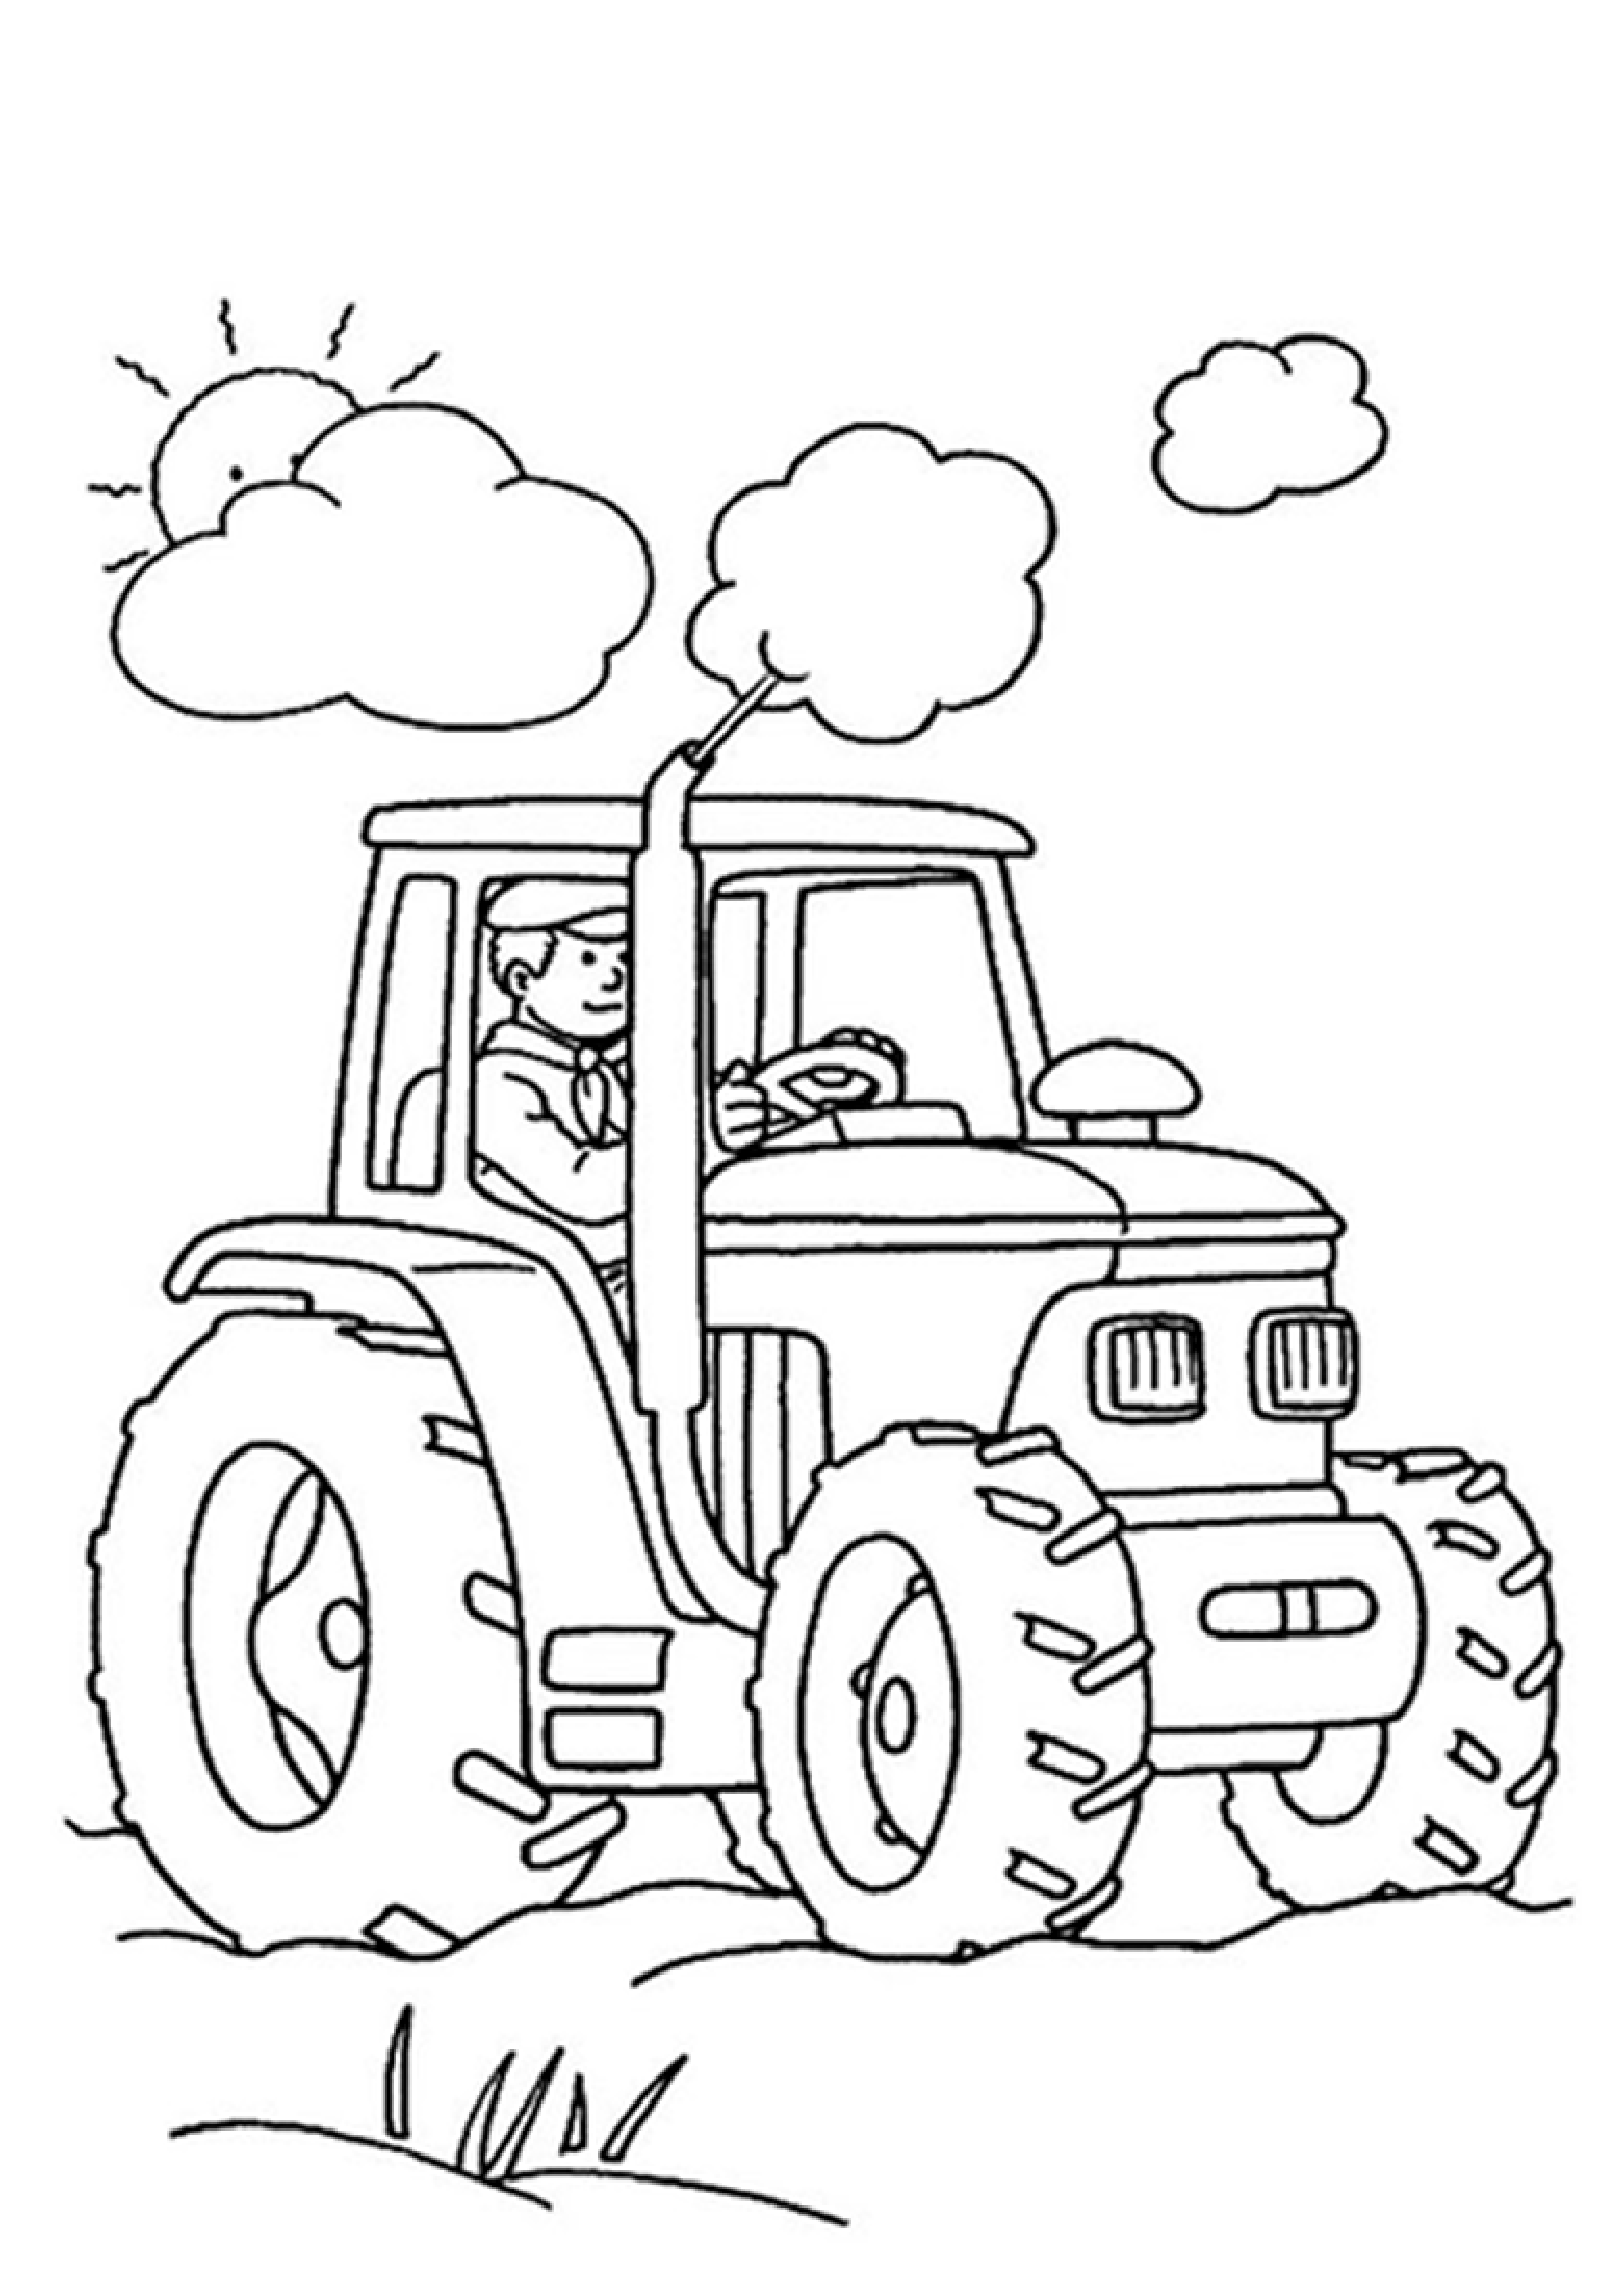 Download Farm free to color for children - Farm Kids Coloring Pages